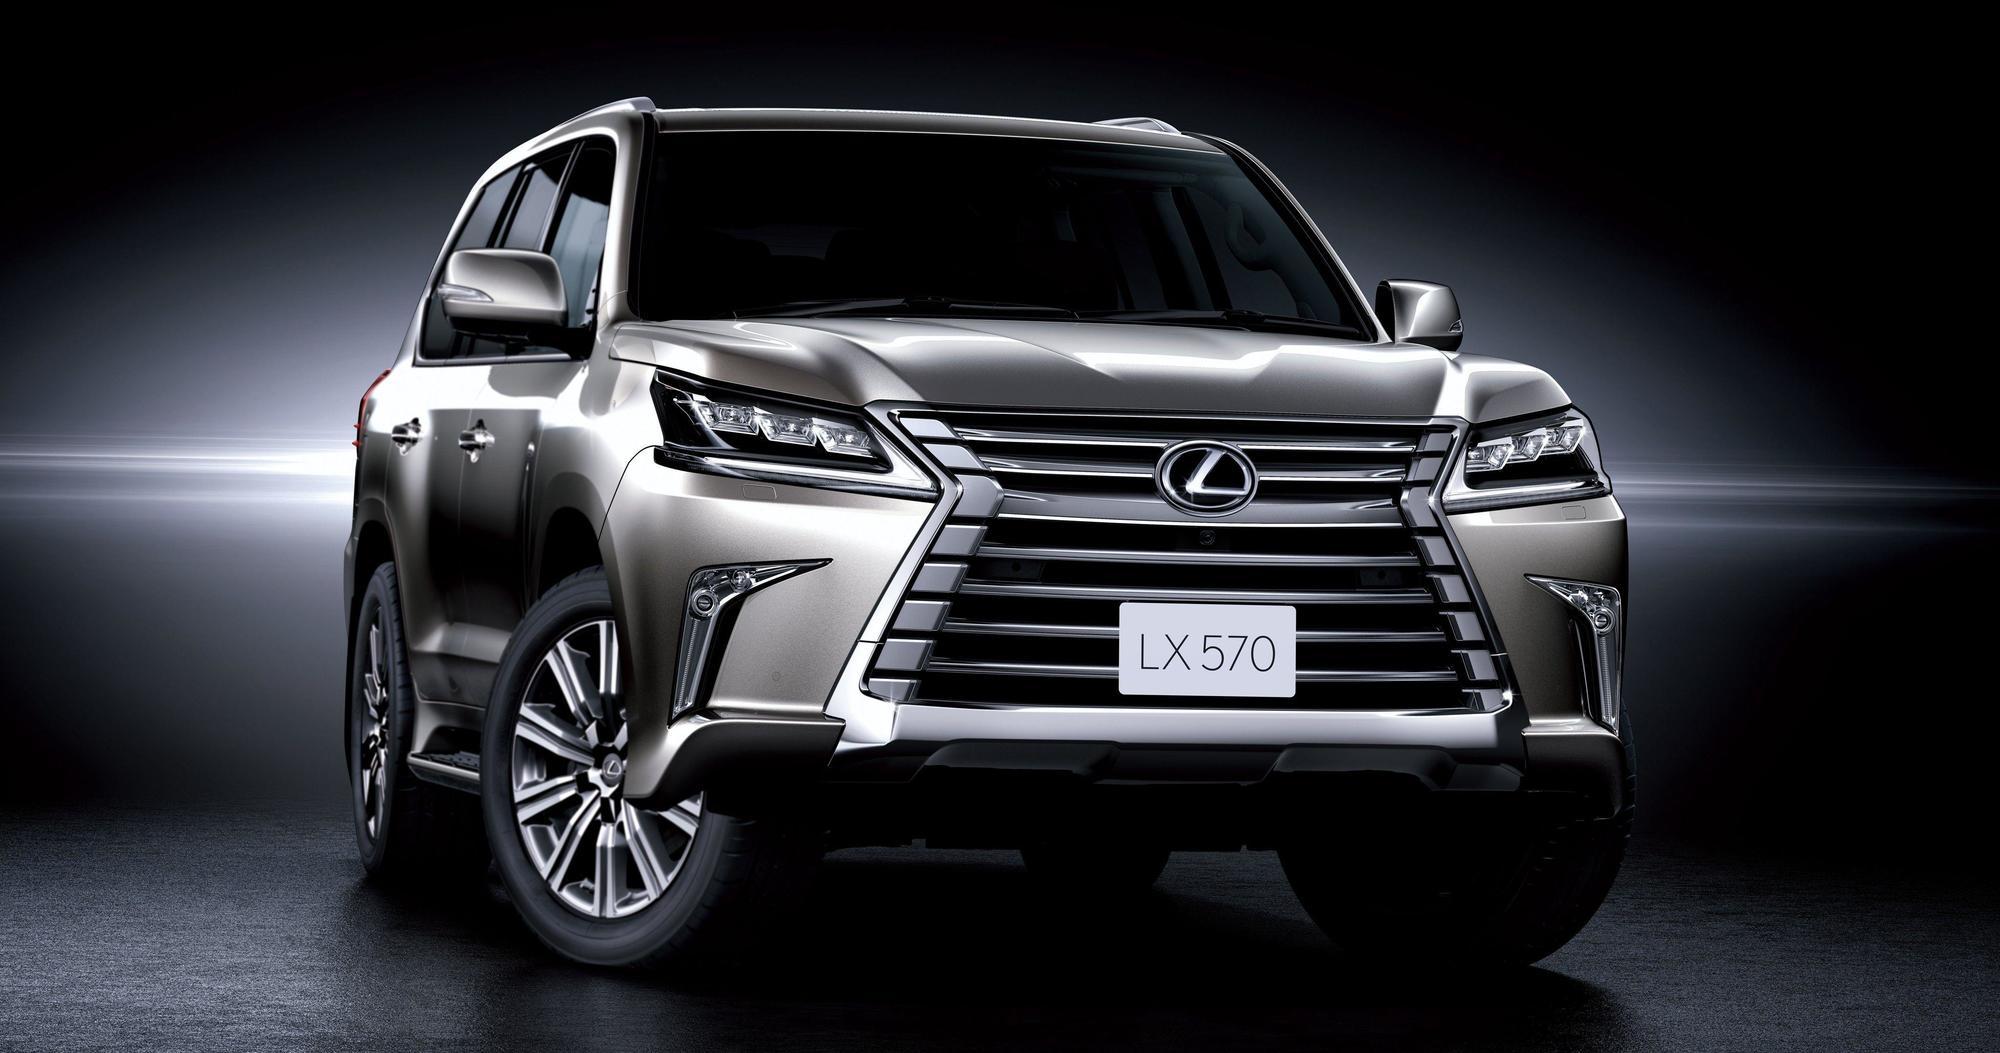 New Lexus Lx570 Wallpaper Photo Image Picture Lx Wall Paper